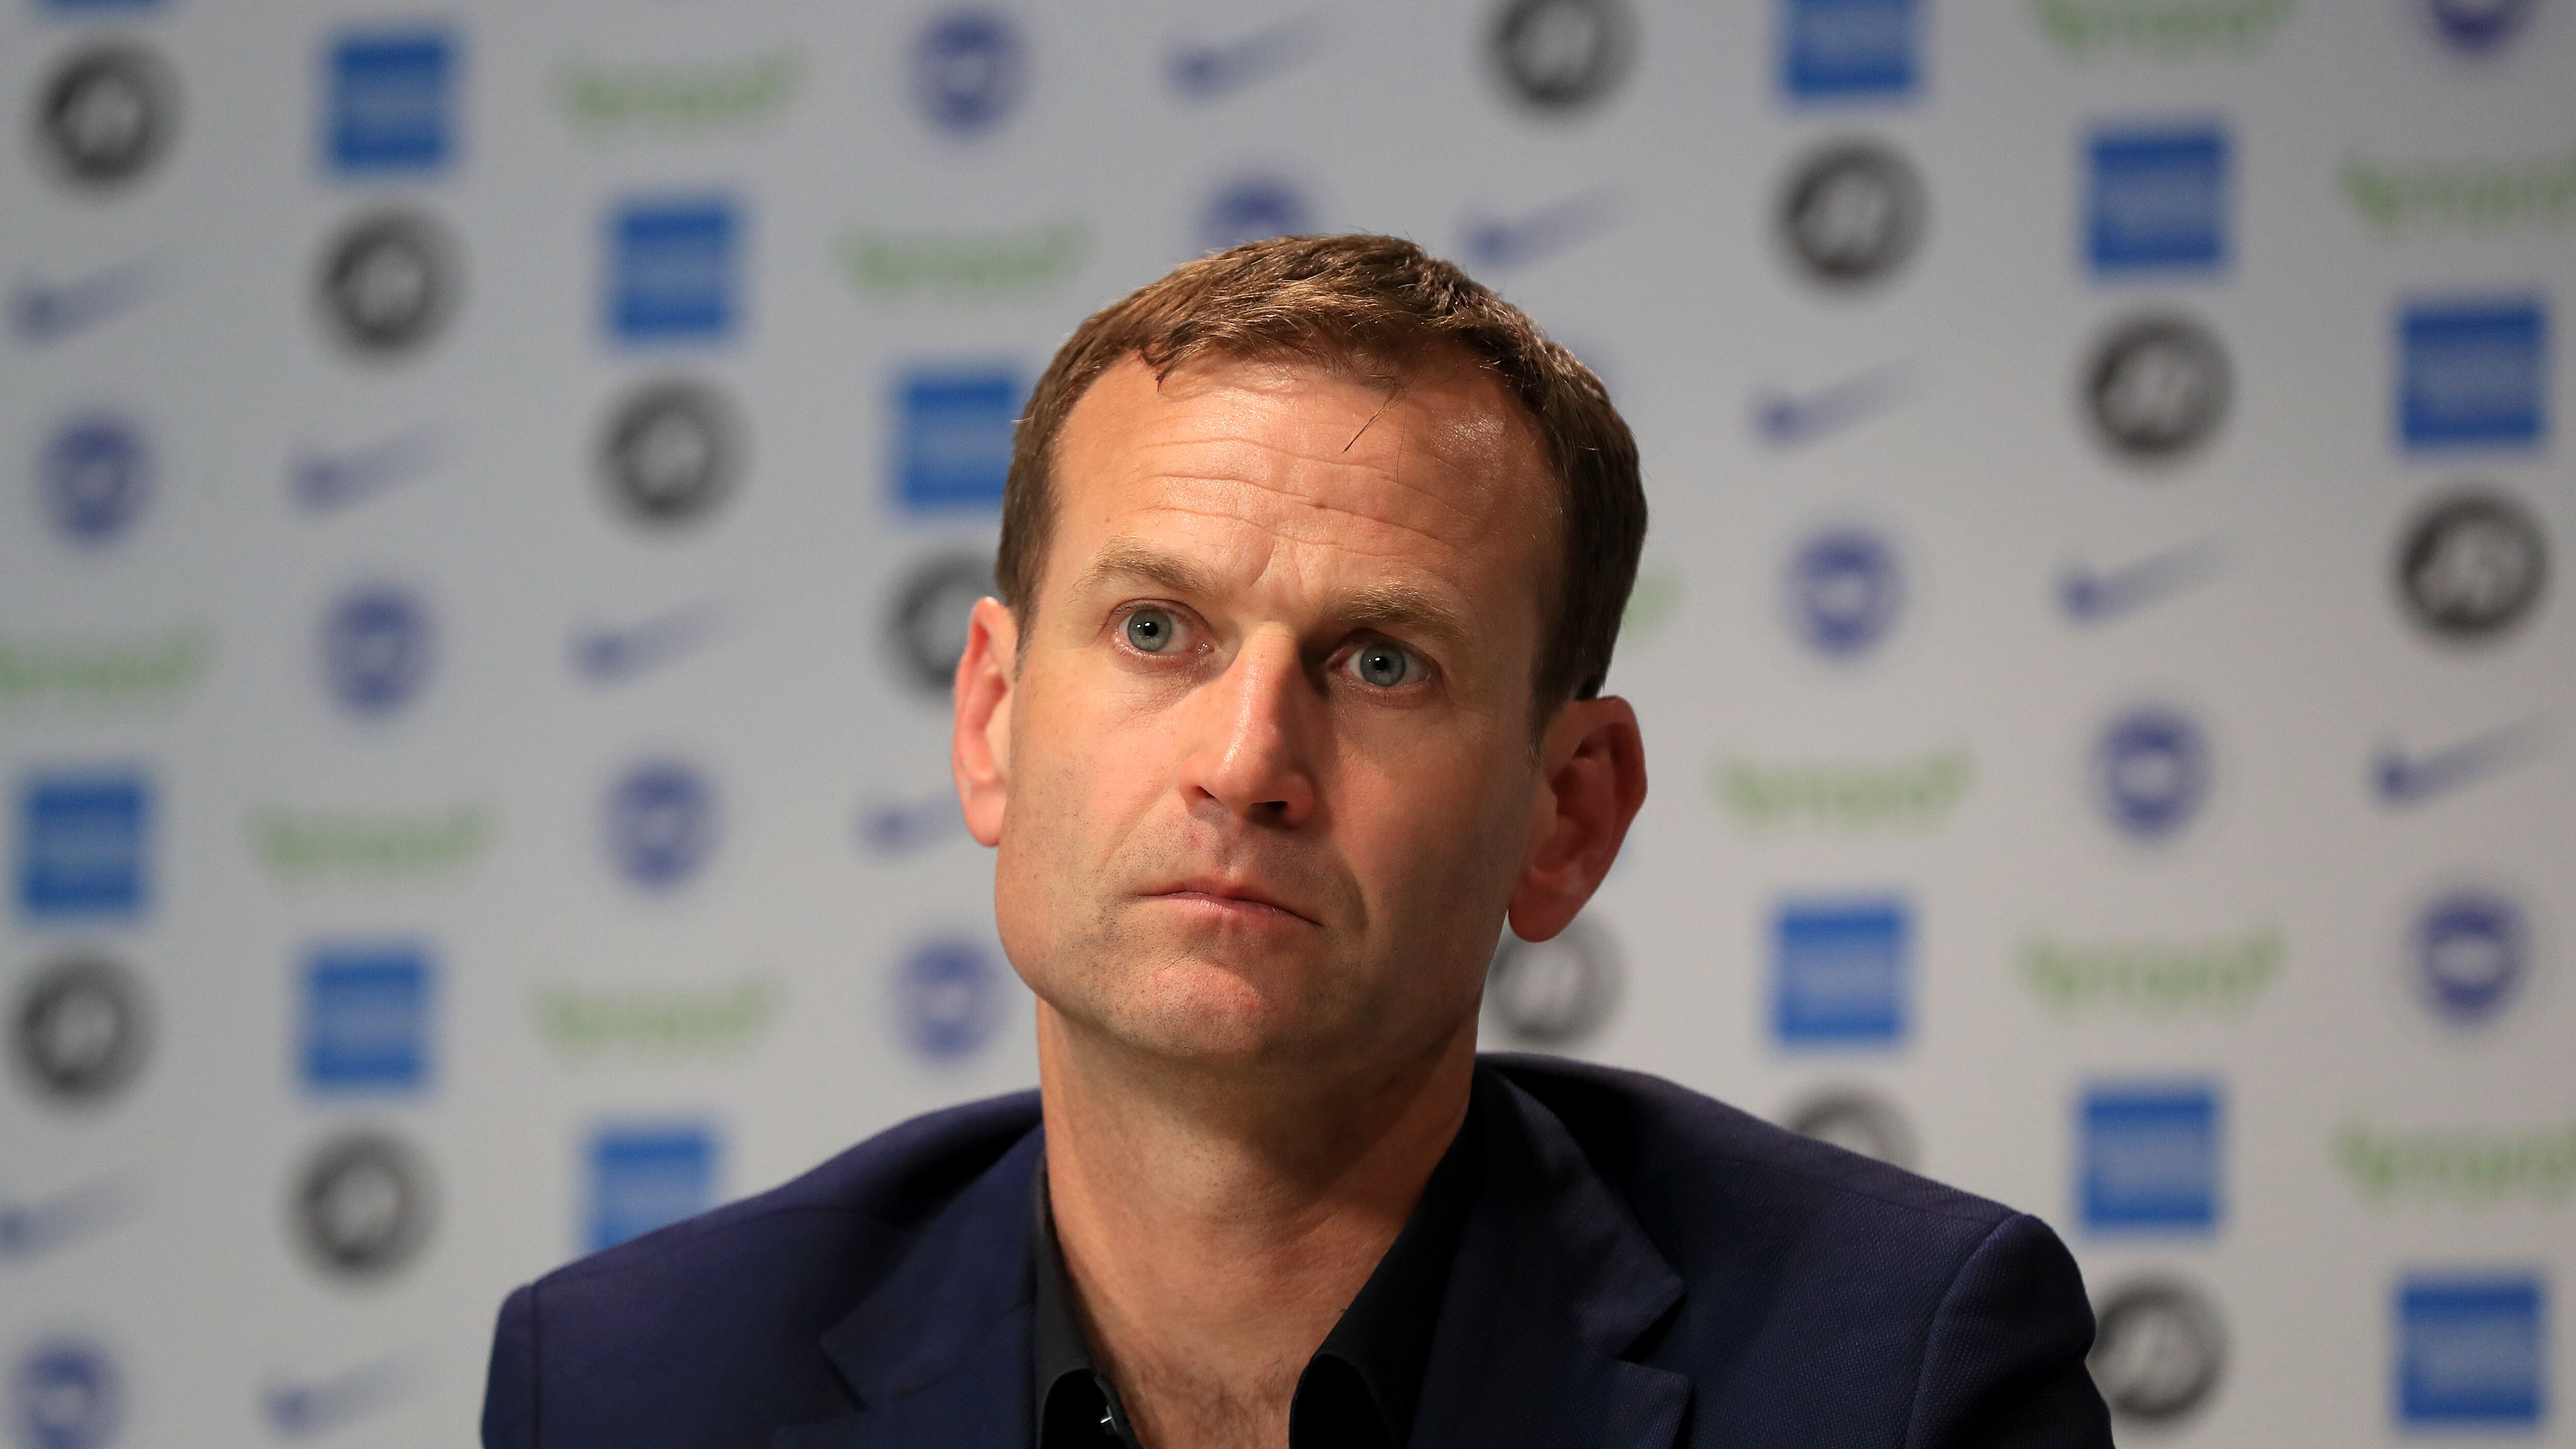 Dan Ashworth, pictured, has joined Manchester United as the club’s new sporting director